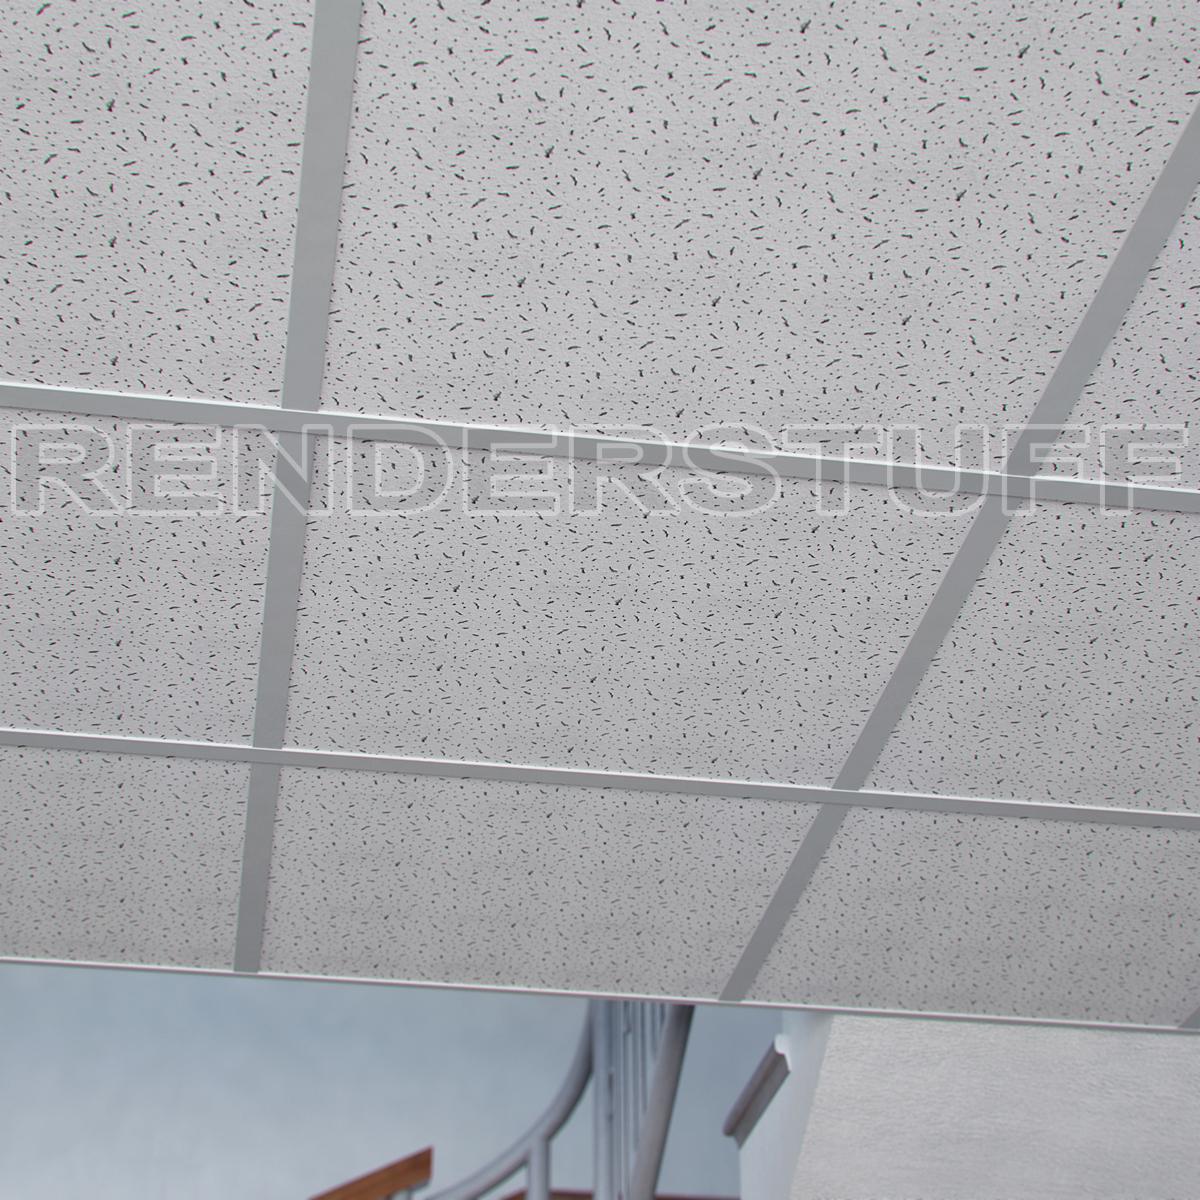 Vwartclub Armstrong Suspended Ceiling